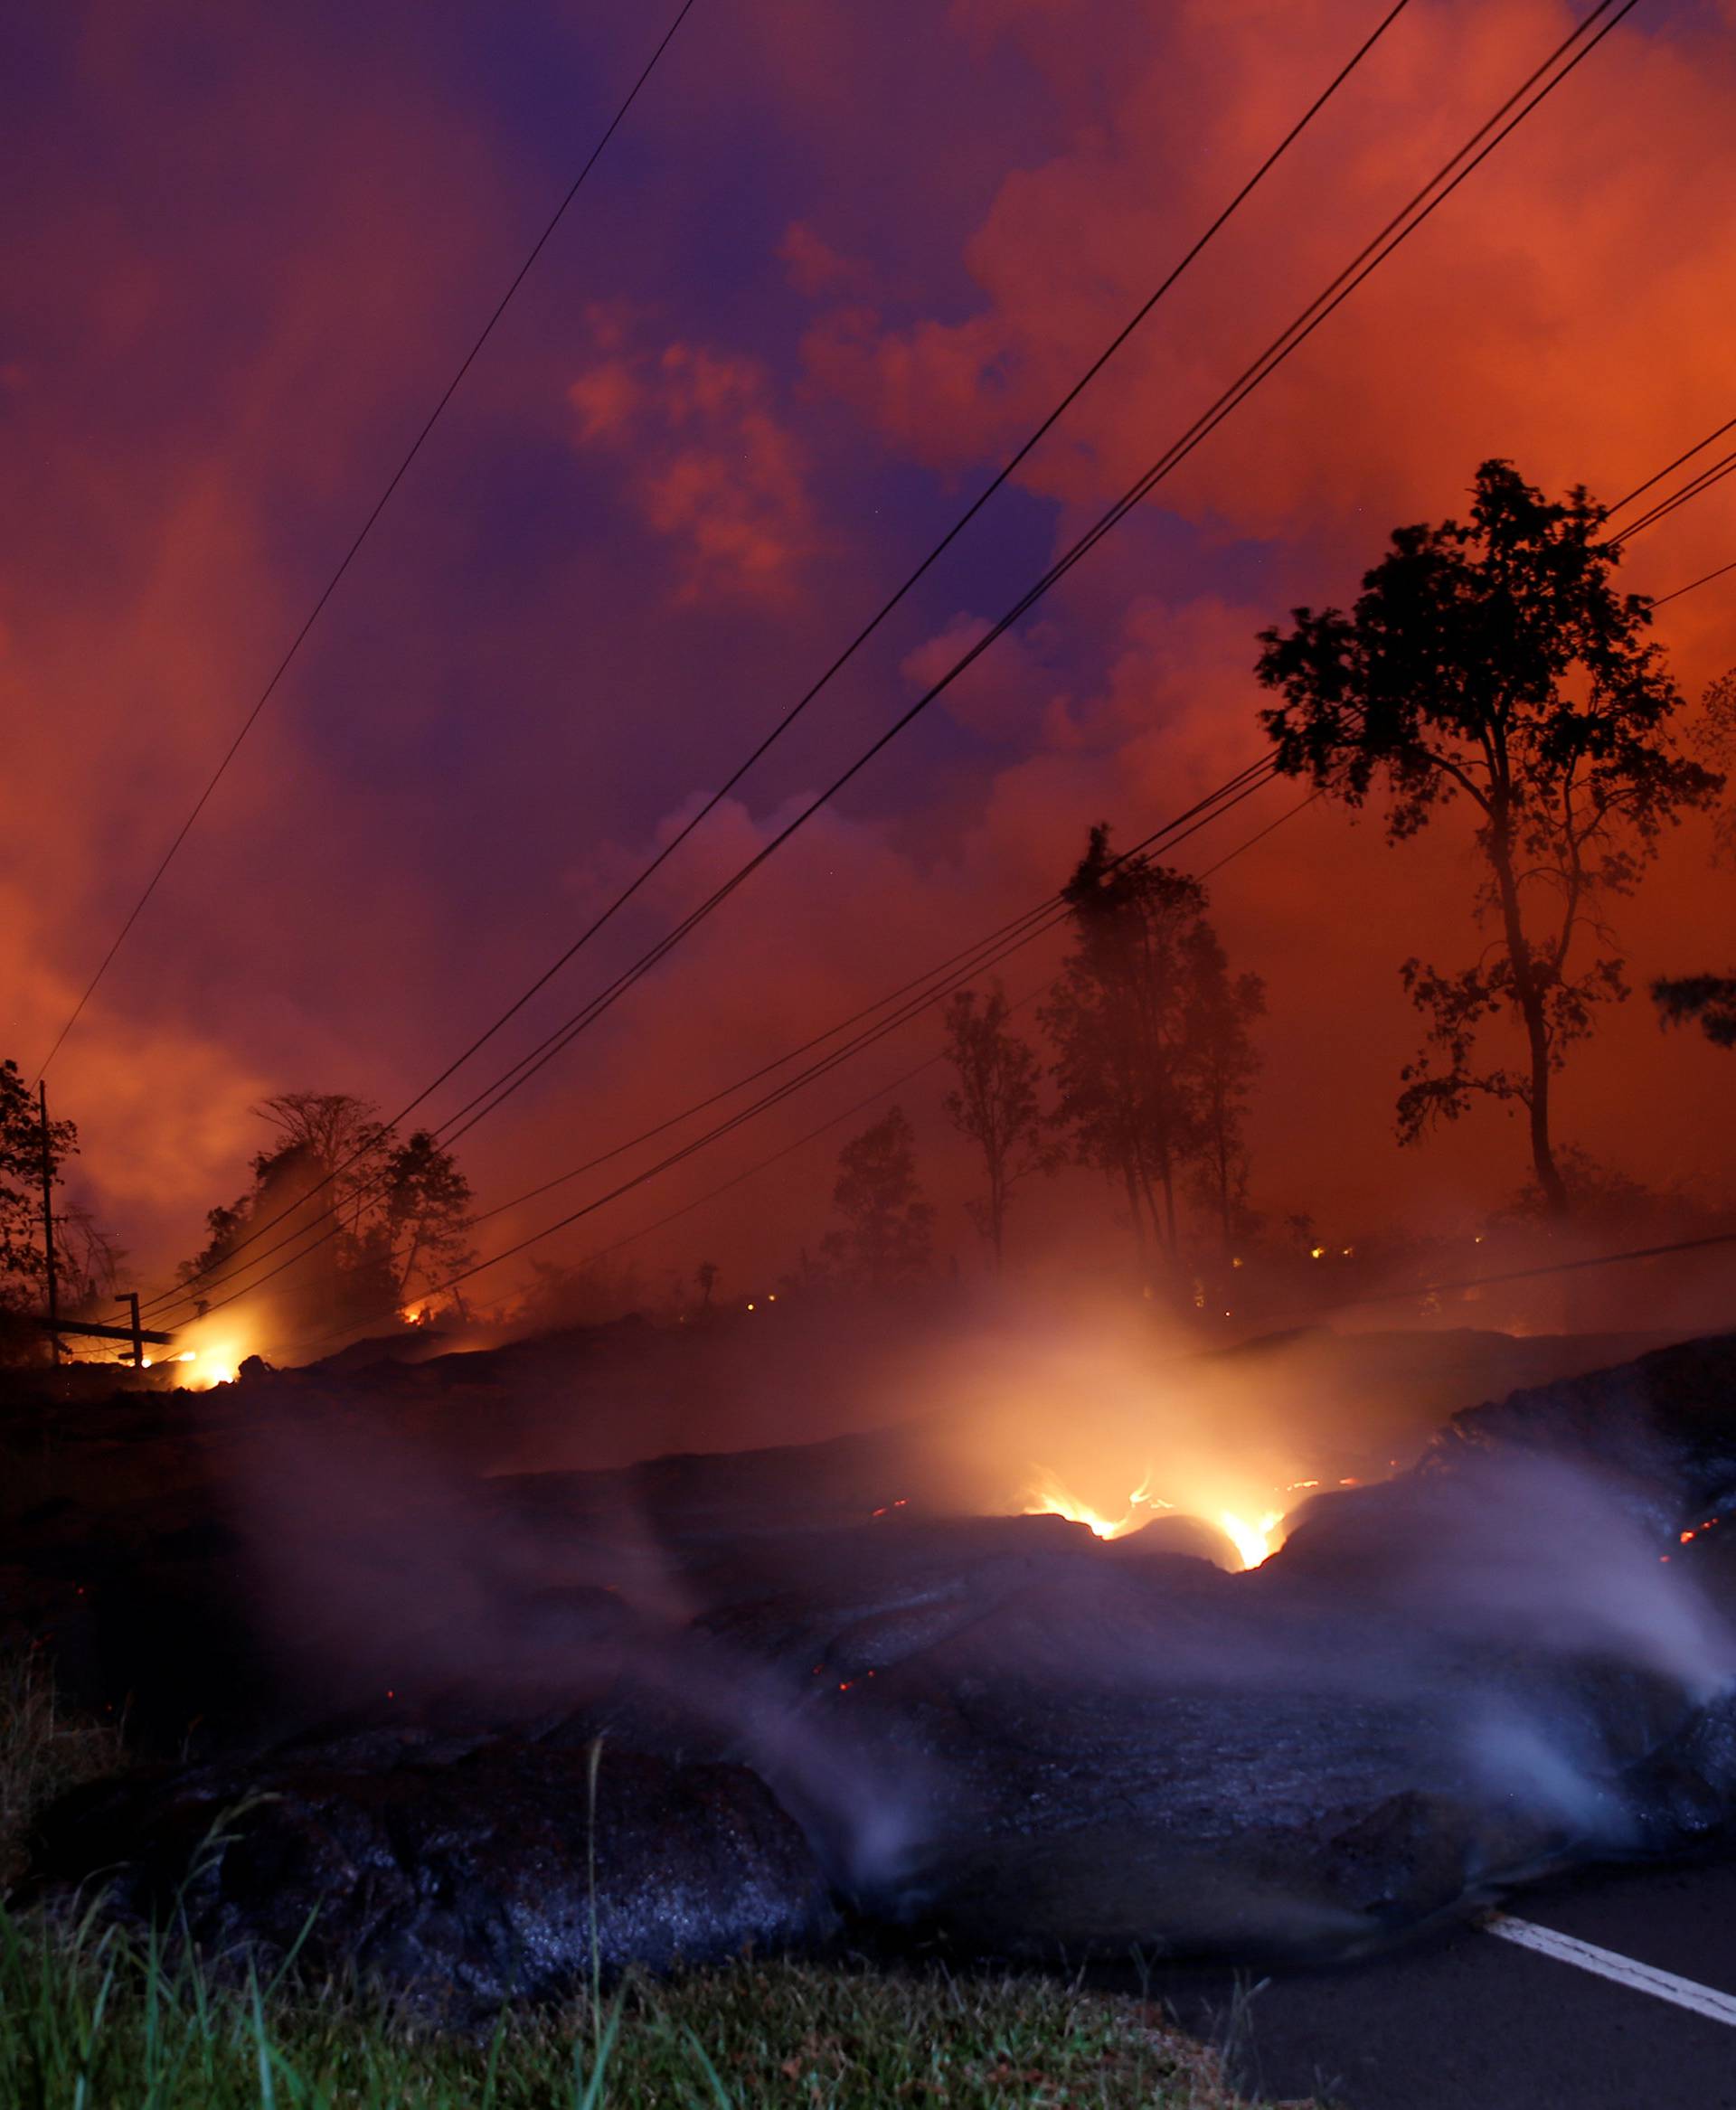 Volcanic gases rise from the Kilauea lava flow that crossed Pohoiki Road near Highway 132, near Pahoa, Hawaii